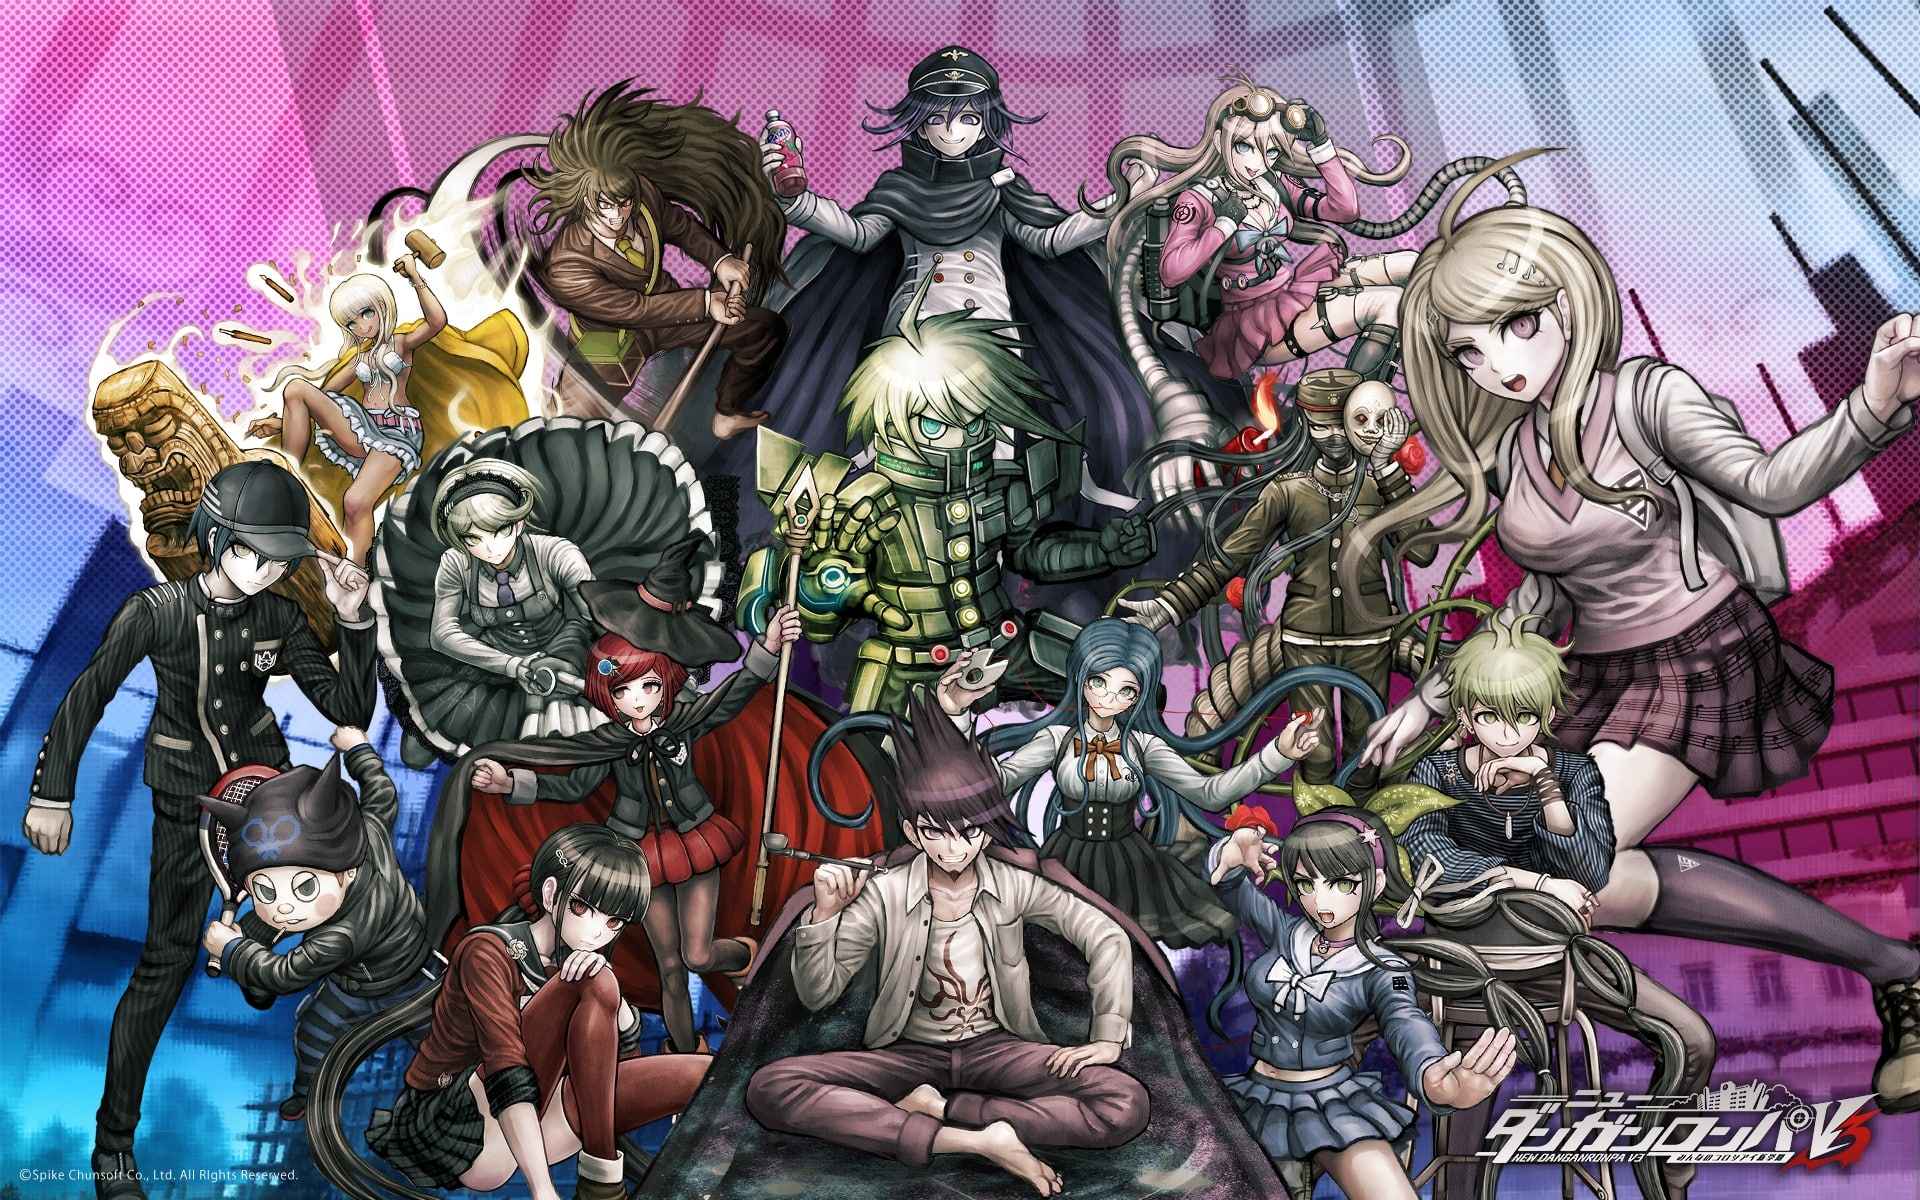 The Official Art of All the Students in Danganronpa V3